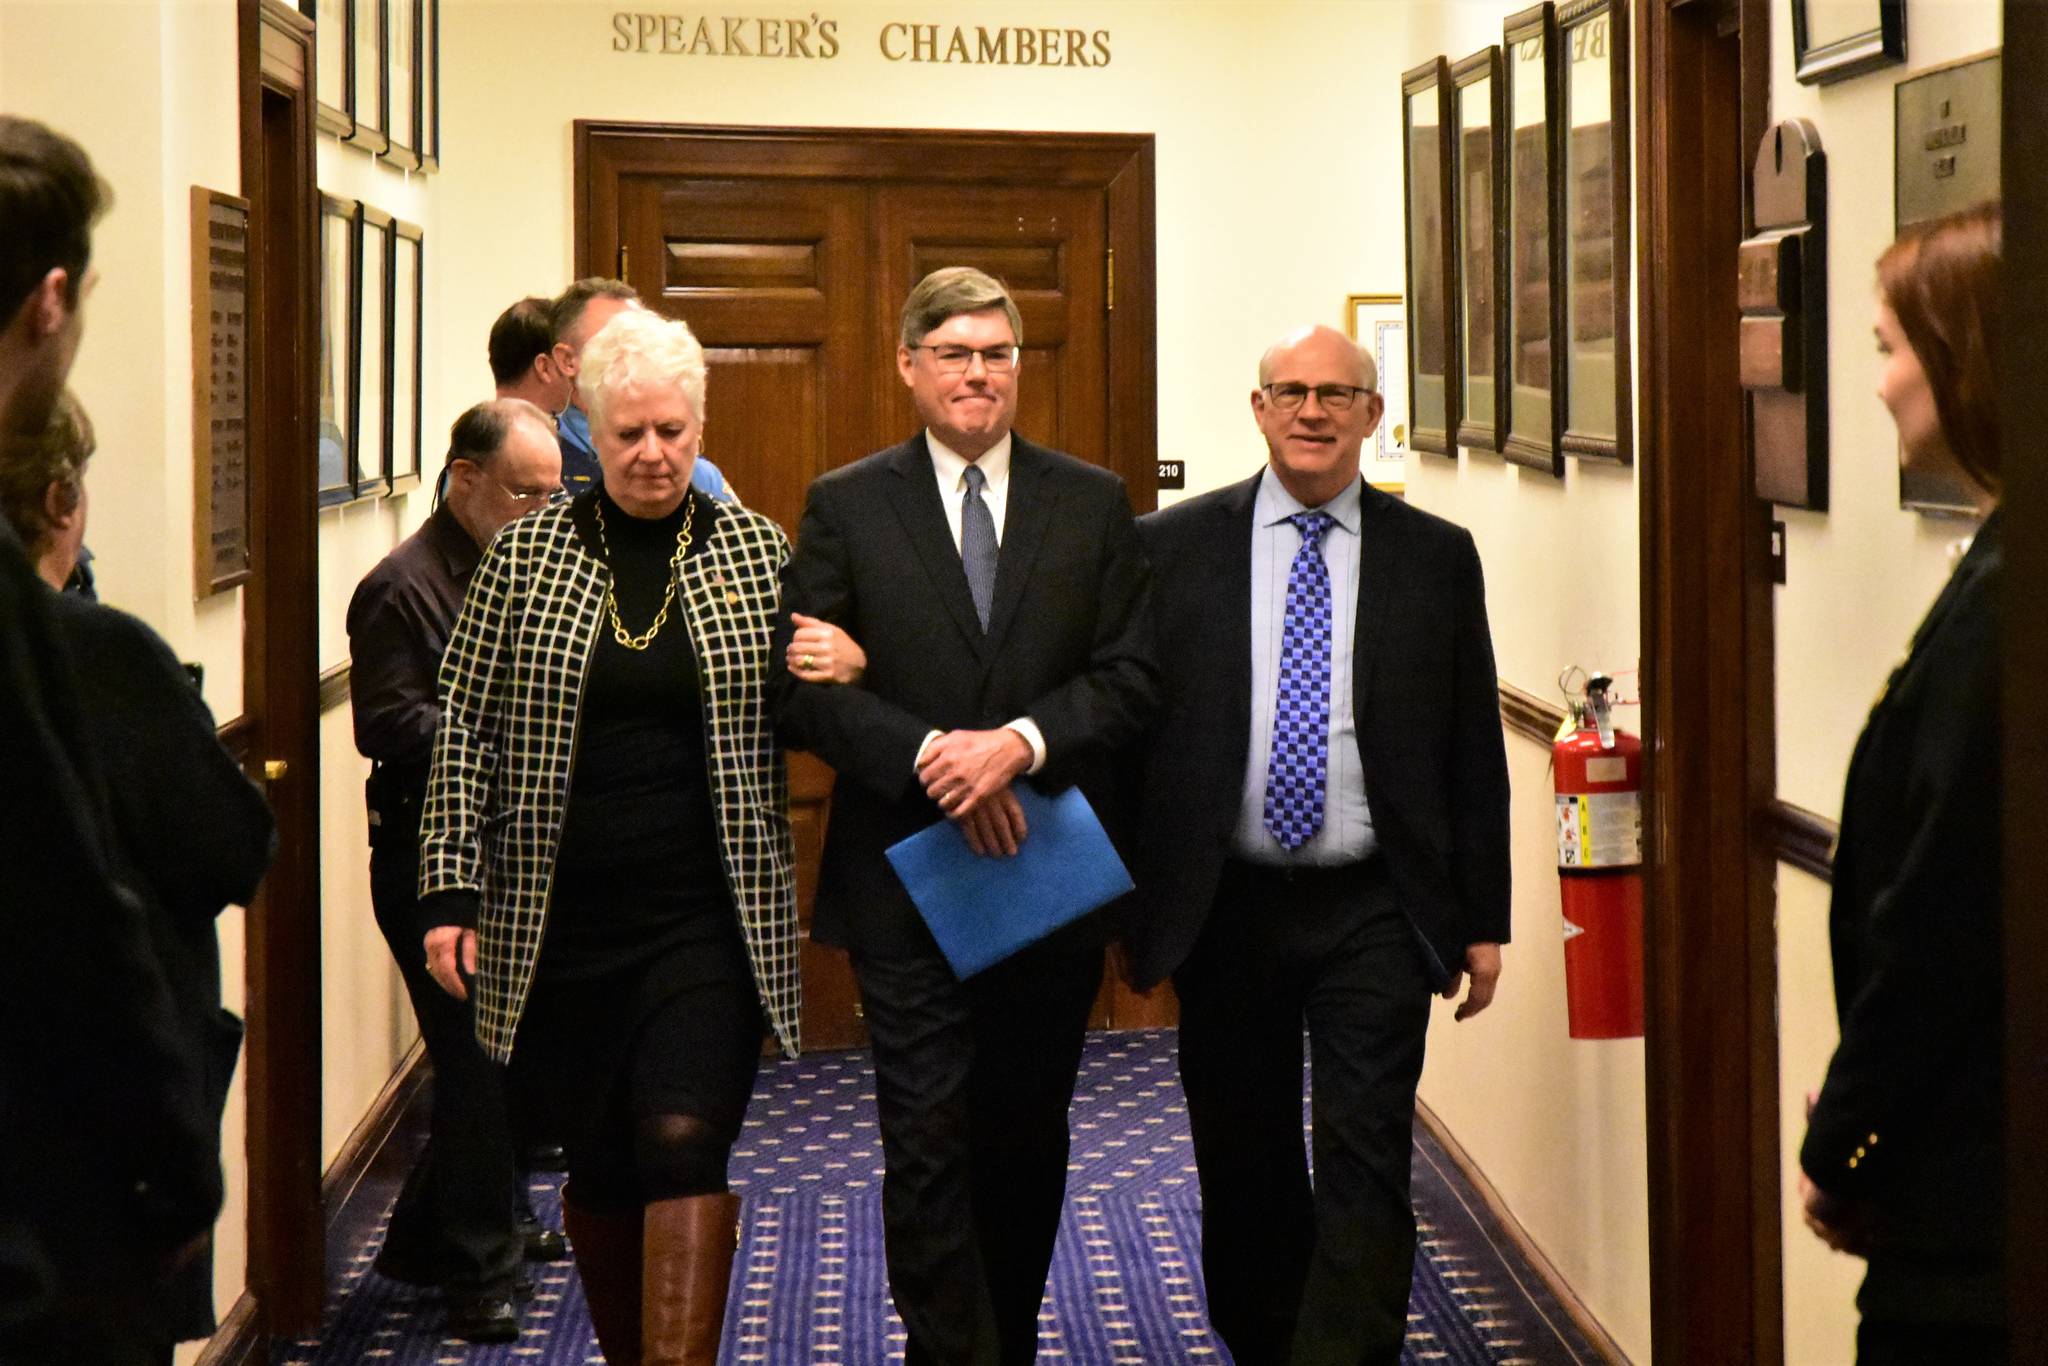 Peter Segall | Juneau Empire                                Alaska Supreme Court Chief Justice Joel M. Bolger, center, is escorted into the House Chamber by Rep. Louise Stutes, R-Kodiak, and Sen. John Coghill, R-North Pole, on Wednesday.